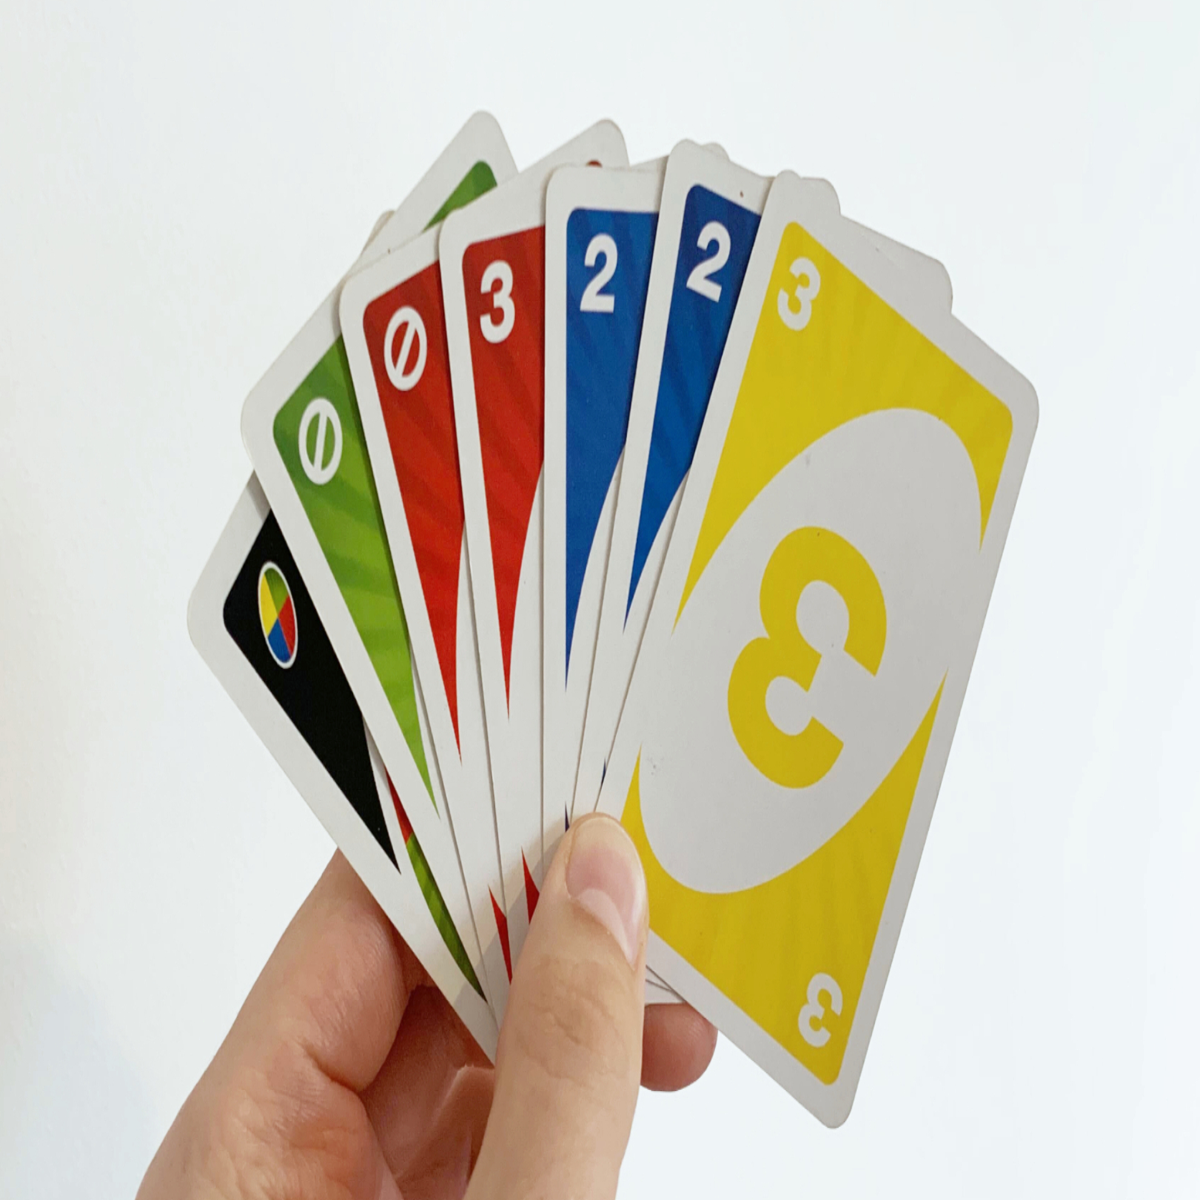 Free Online Multiplayer Uno Card Game Online: Play 2, 3, or 4